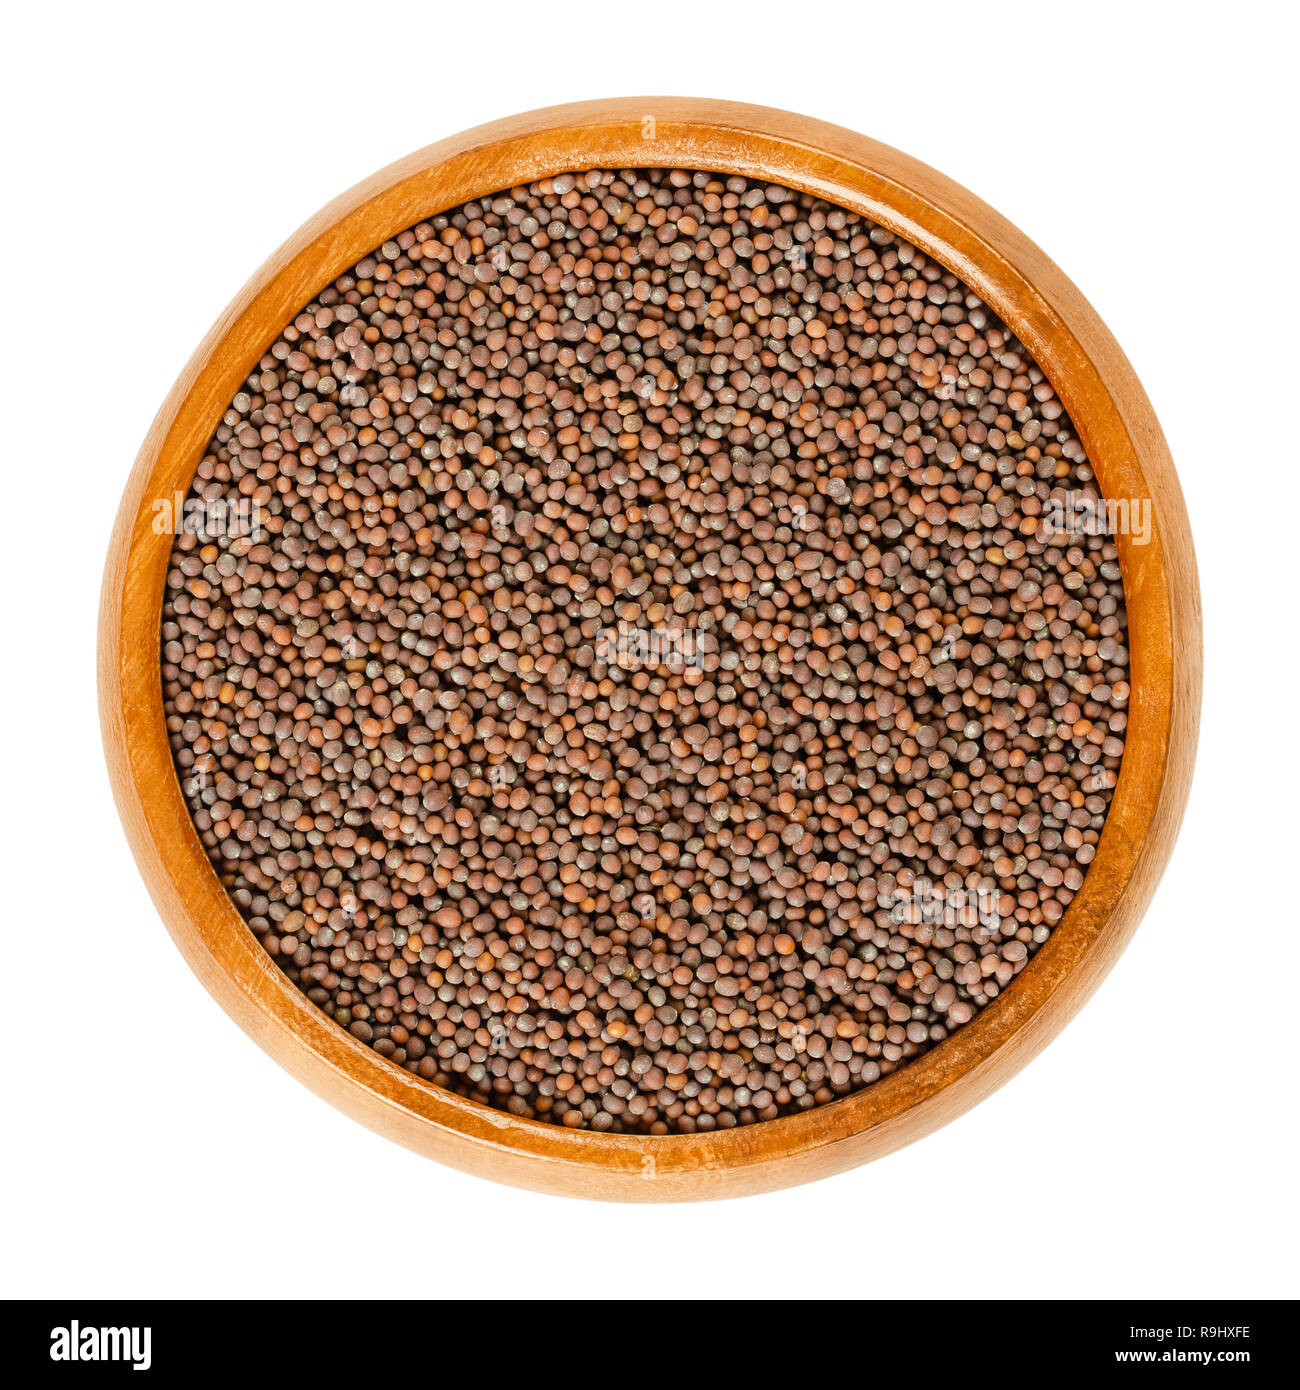 Black mustard seeds in wooden bowl. Brassica nigra with black and dark brown seeds. Used for making mustard, sprouting, as a spice and as a condiment. Stock Photo